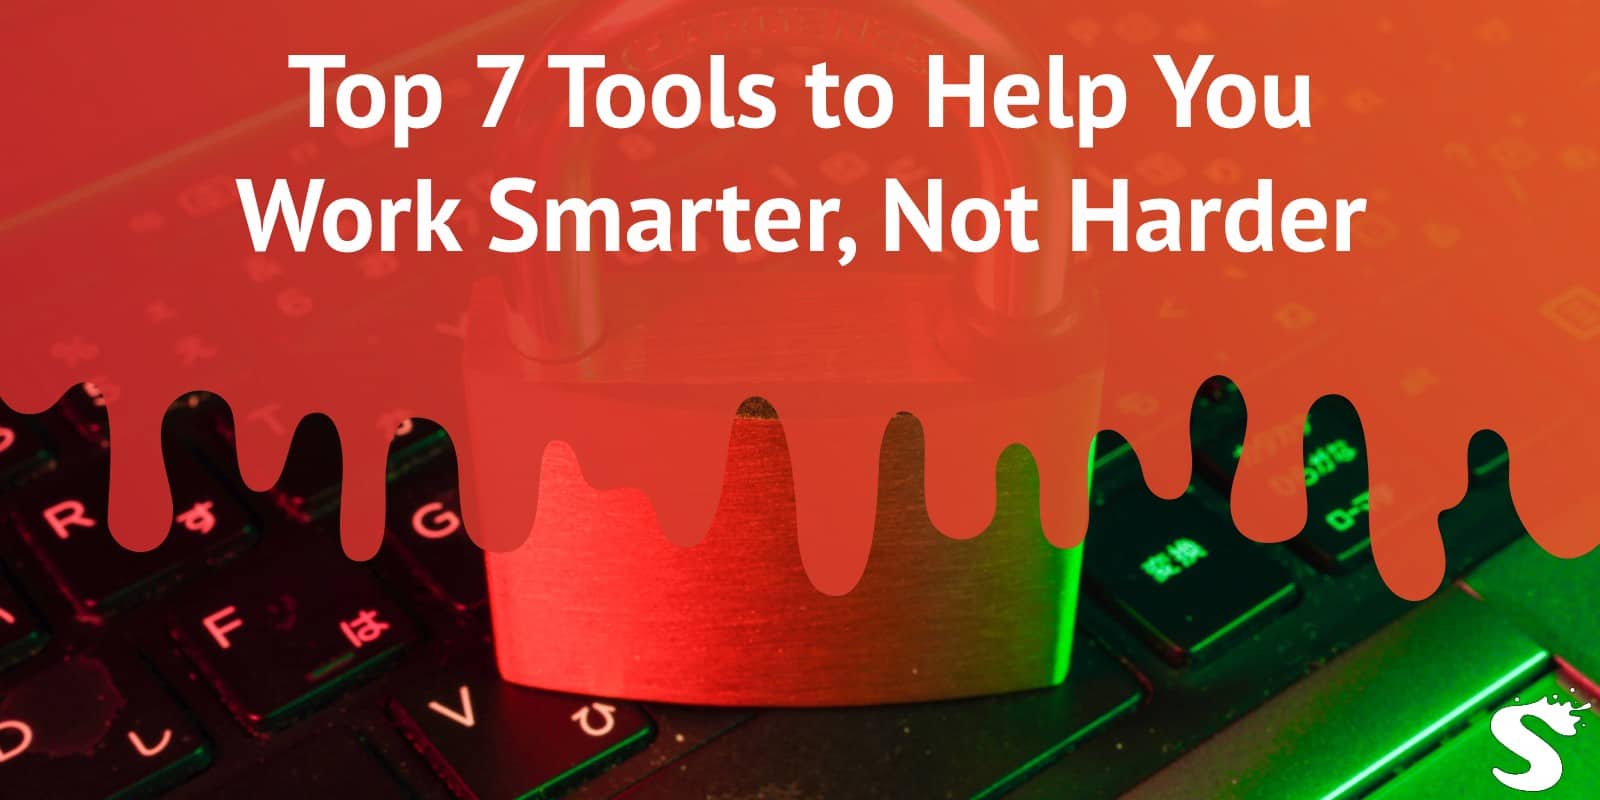 Top 7 Tools to Help You Work Smarter, Not Harder